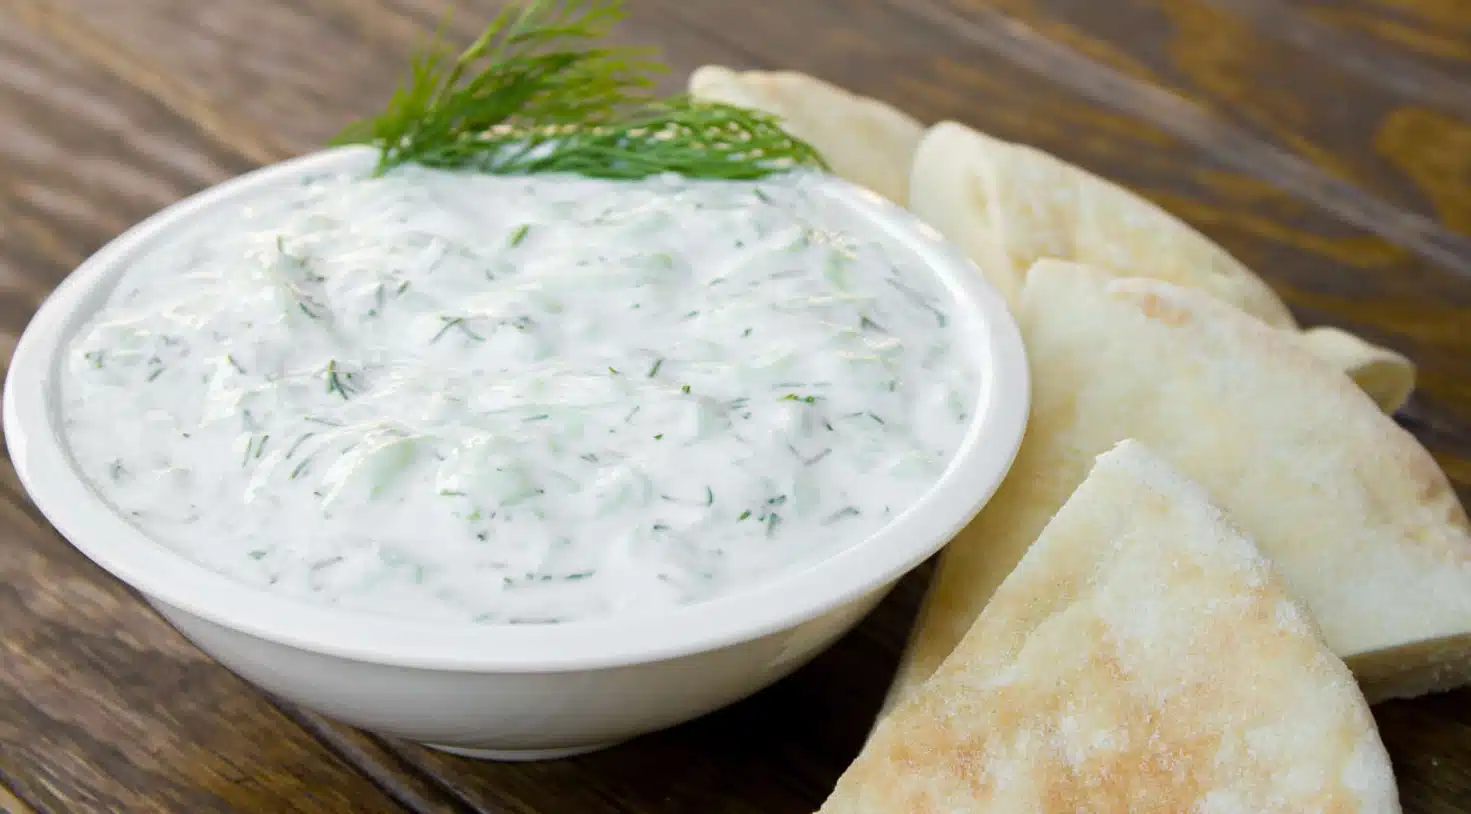 Discover the unique flavors of WingStop Ranch, learn about its ingredients, and find out how to recreate this popular dressing at home.